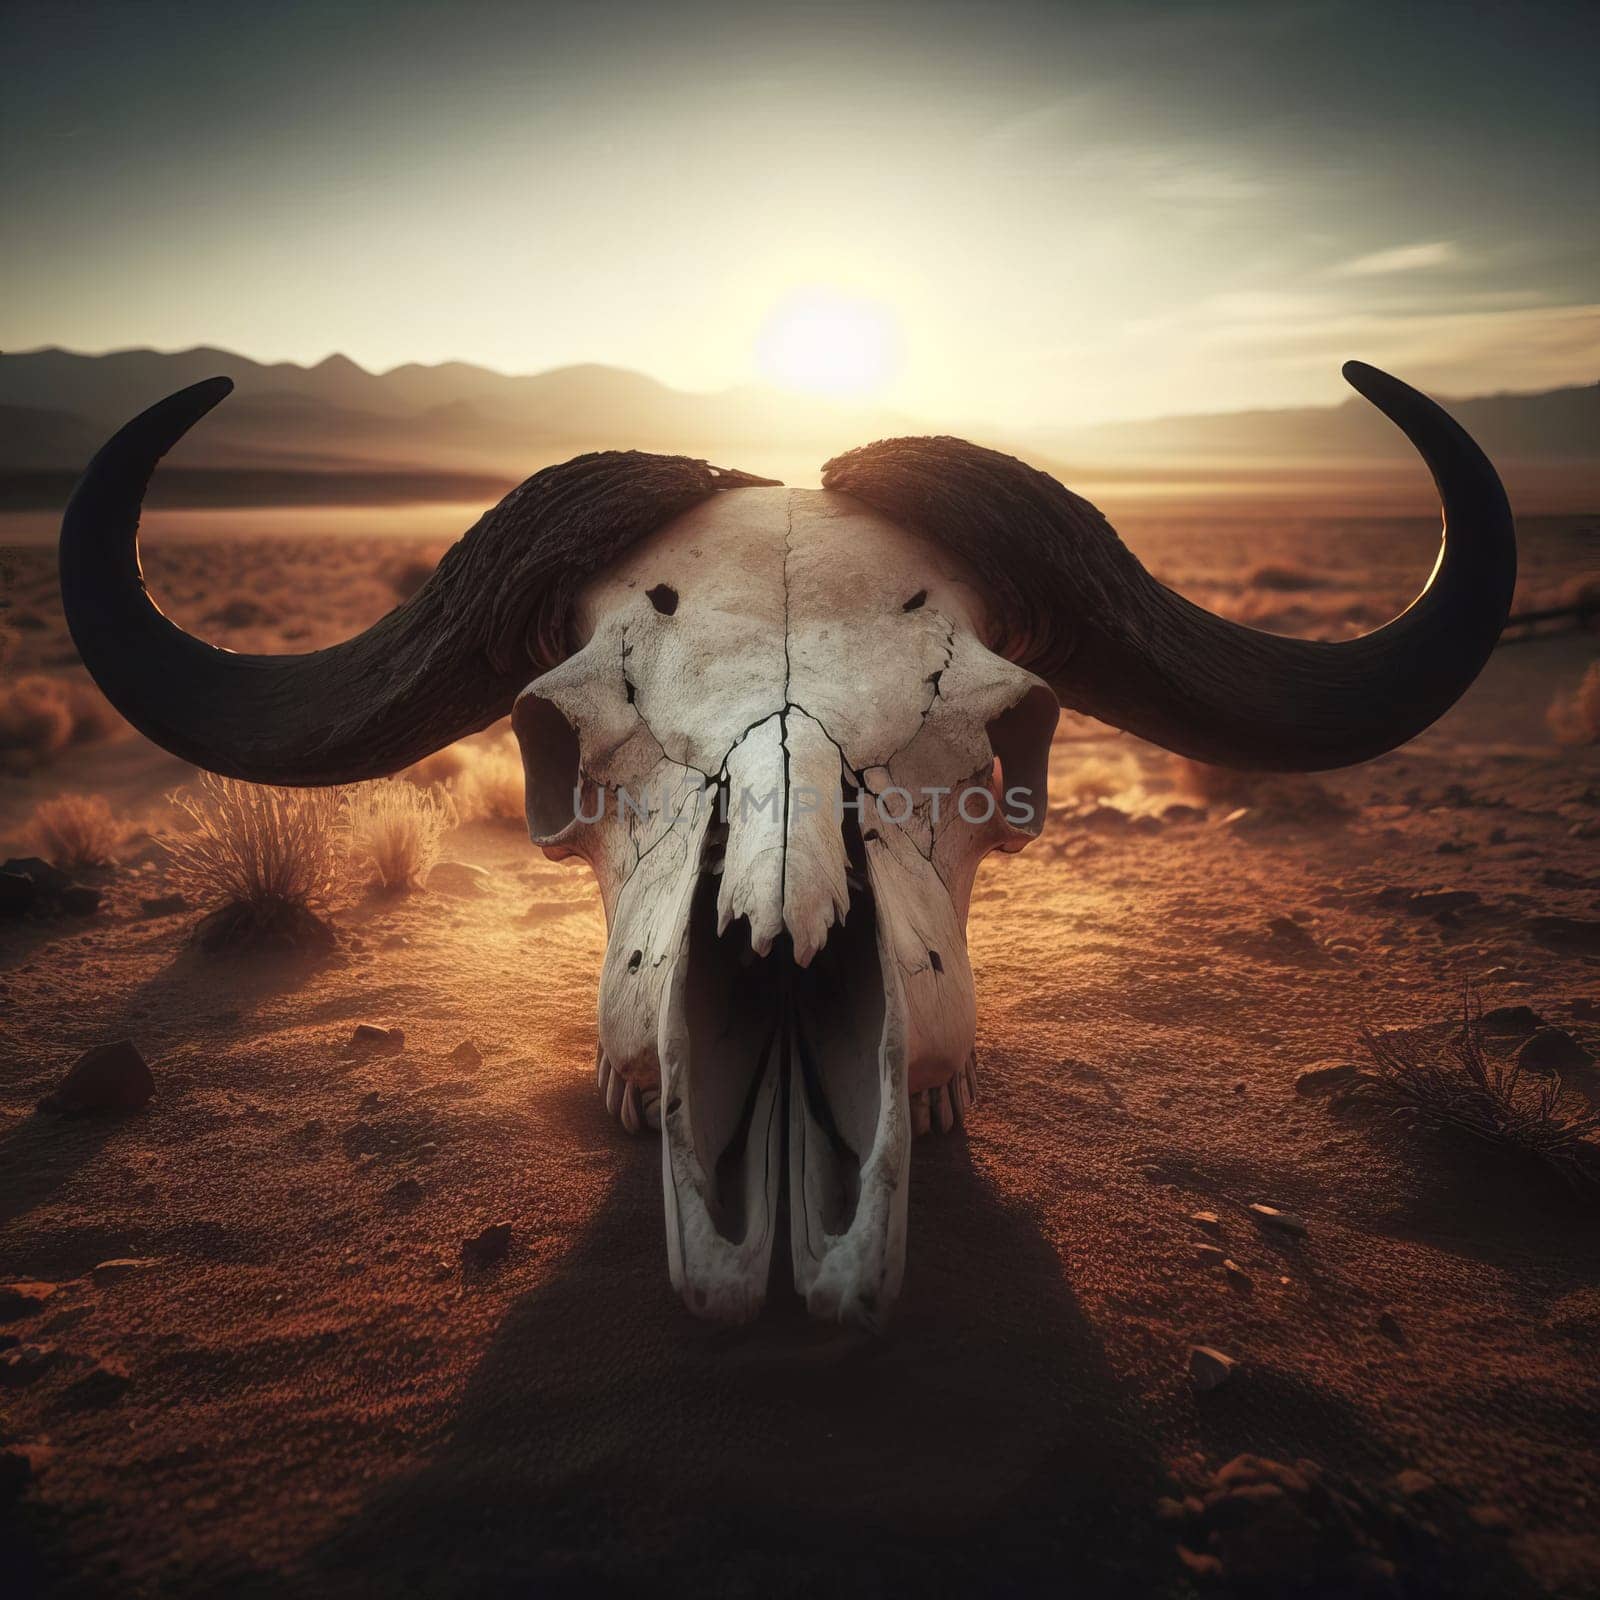 Close-up low angle view of a buffalo skull in a desert landscape with a sunrise in the background